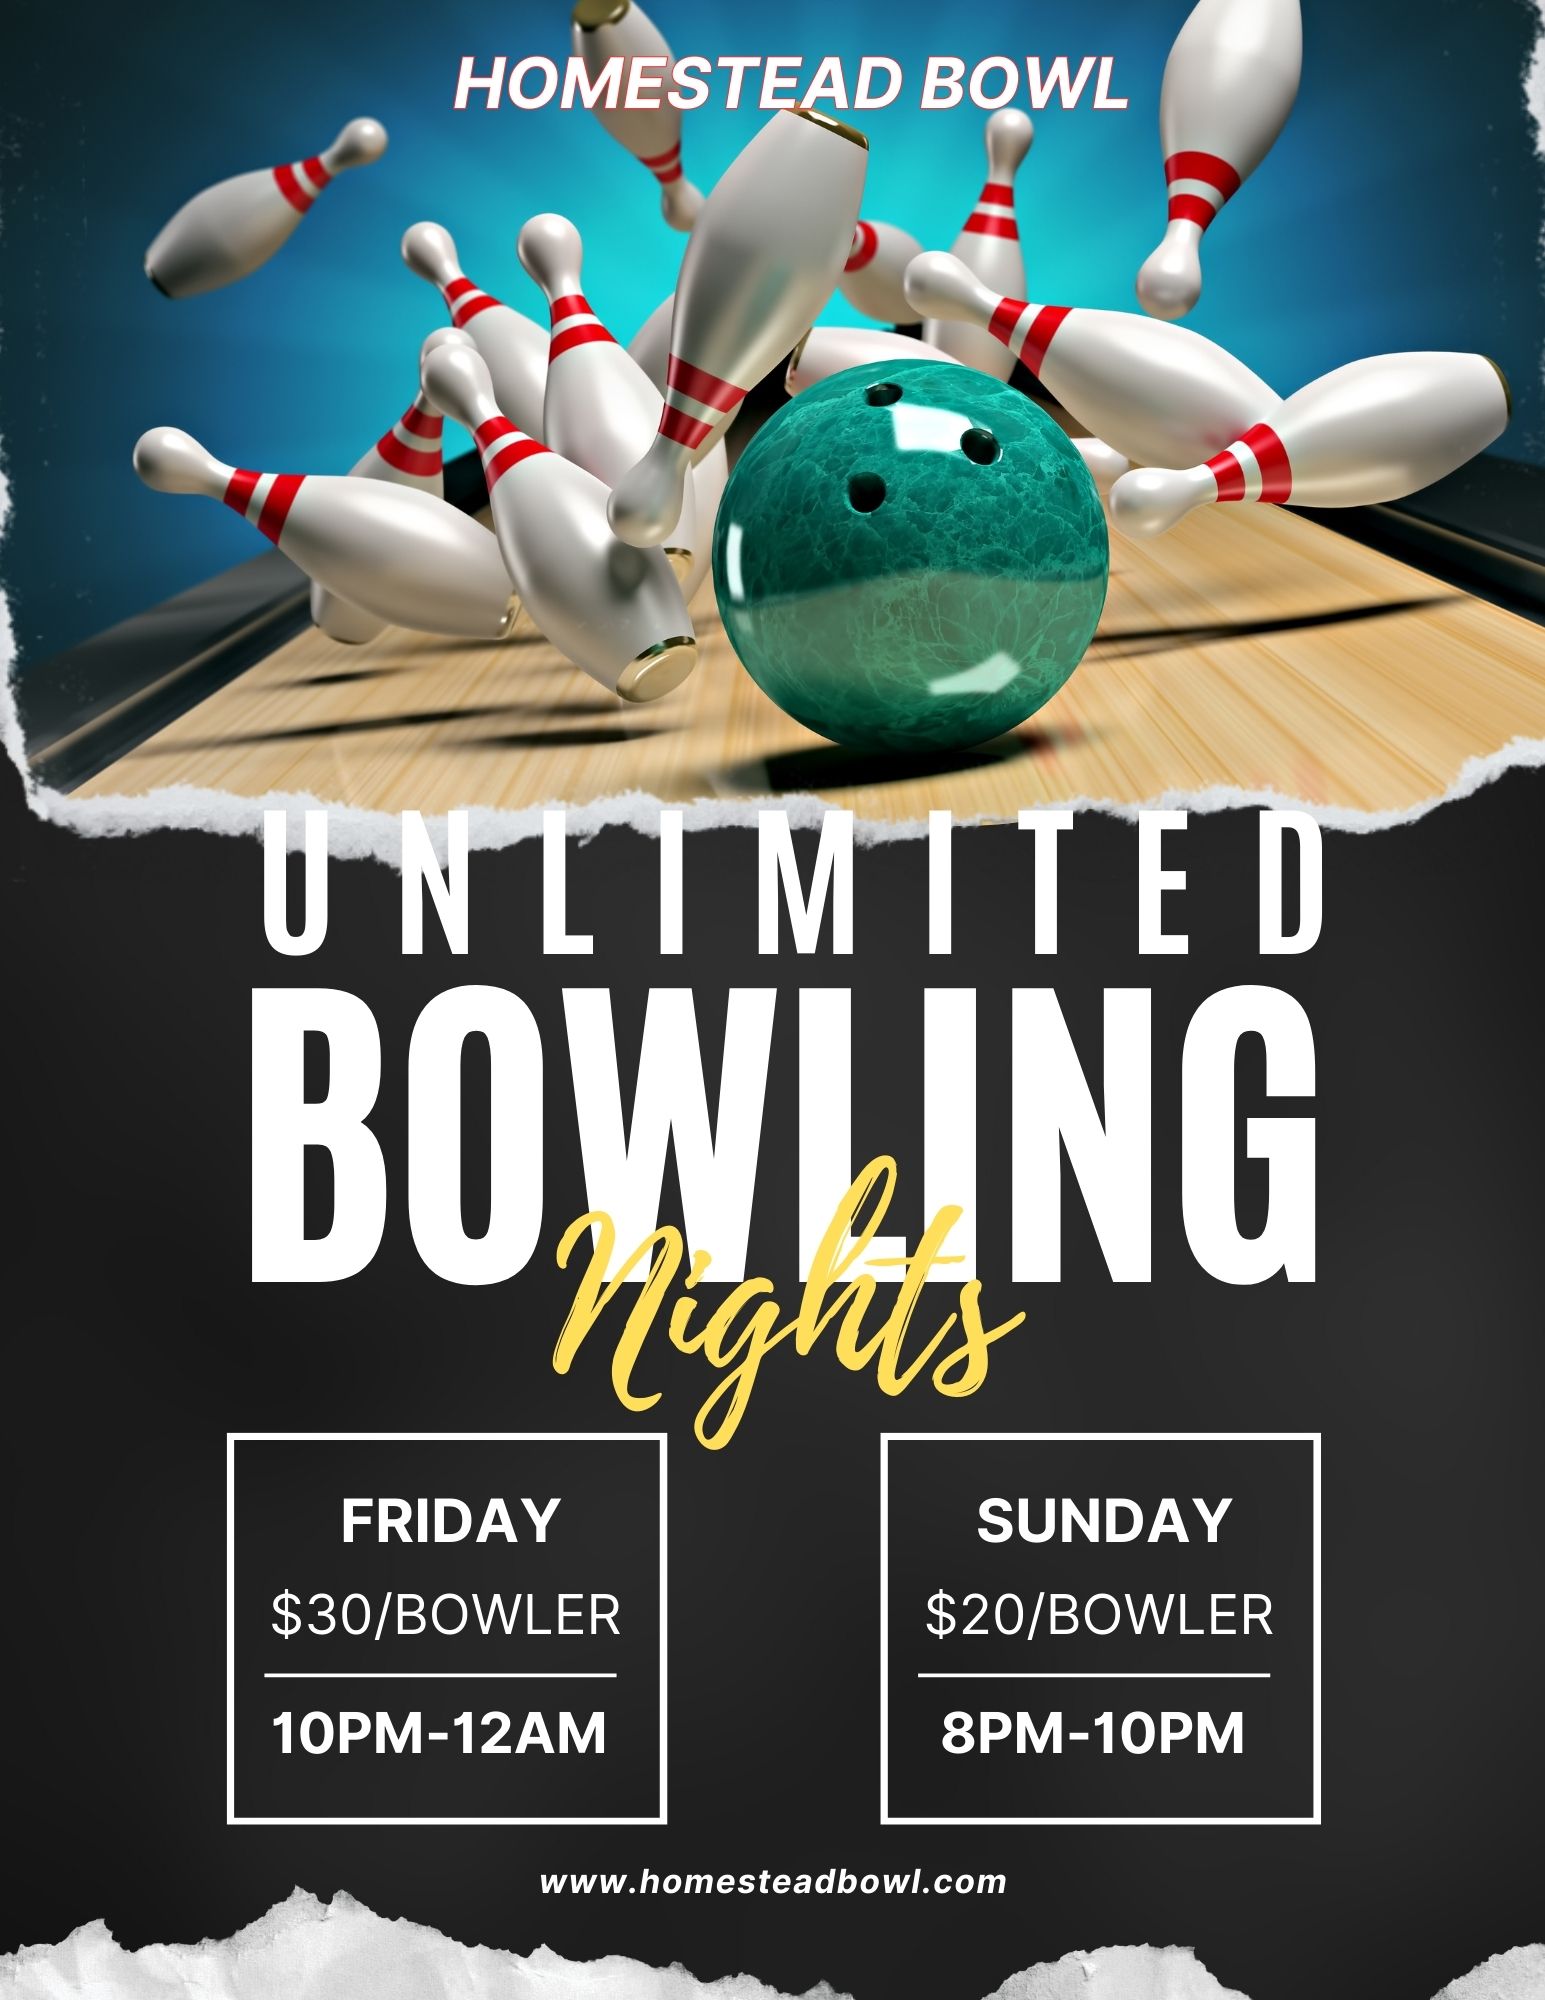 Special Unlimited Bowling